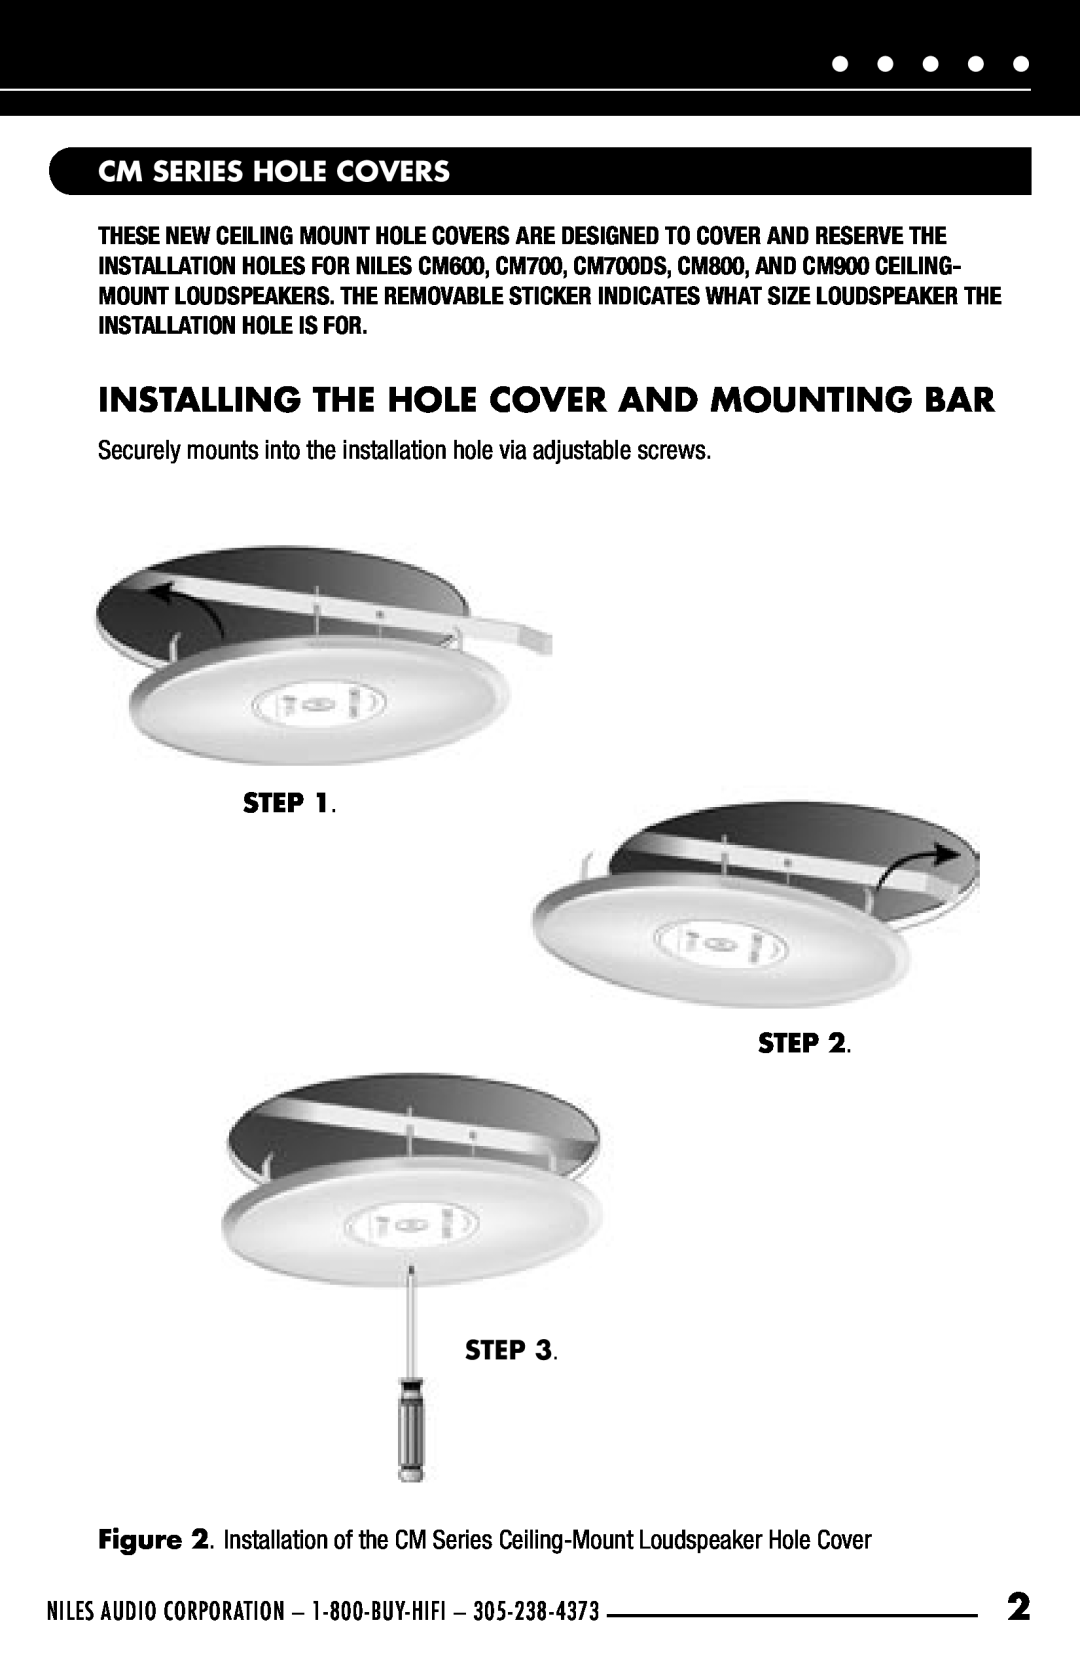 Niles Audio CM Series manual Cm Series Hole Covers, Installing The Hole Cover And Mounting Bar, Step Step Step 